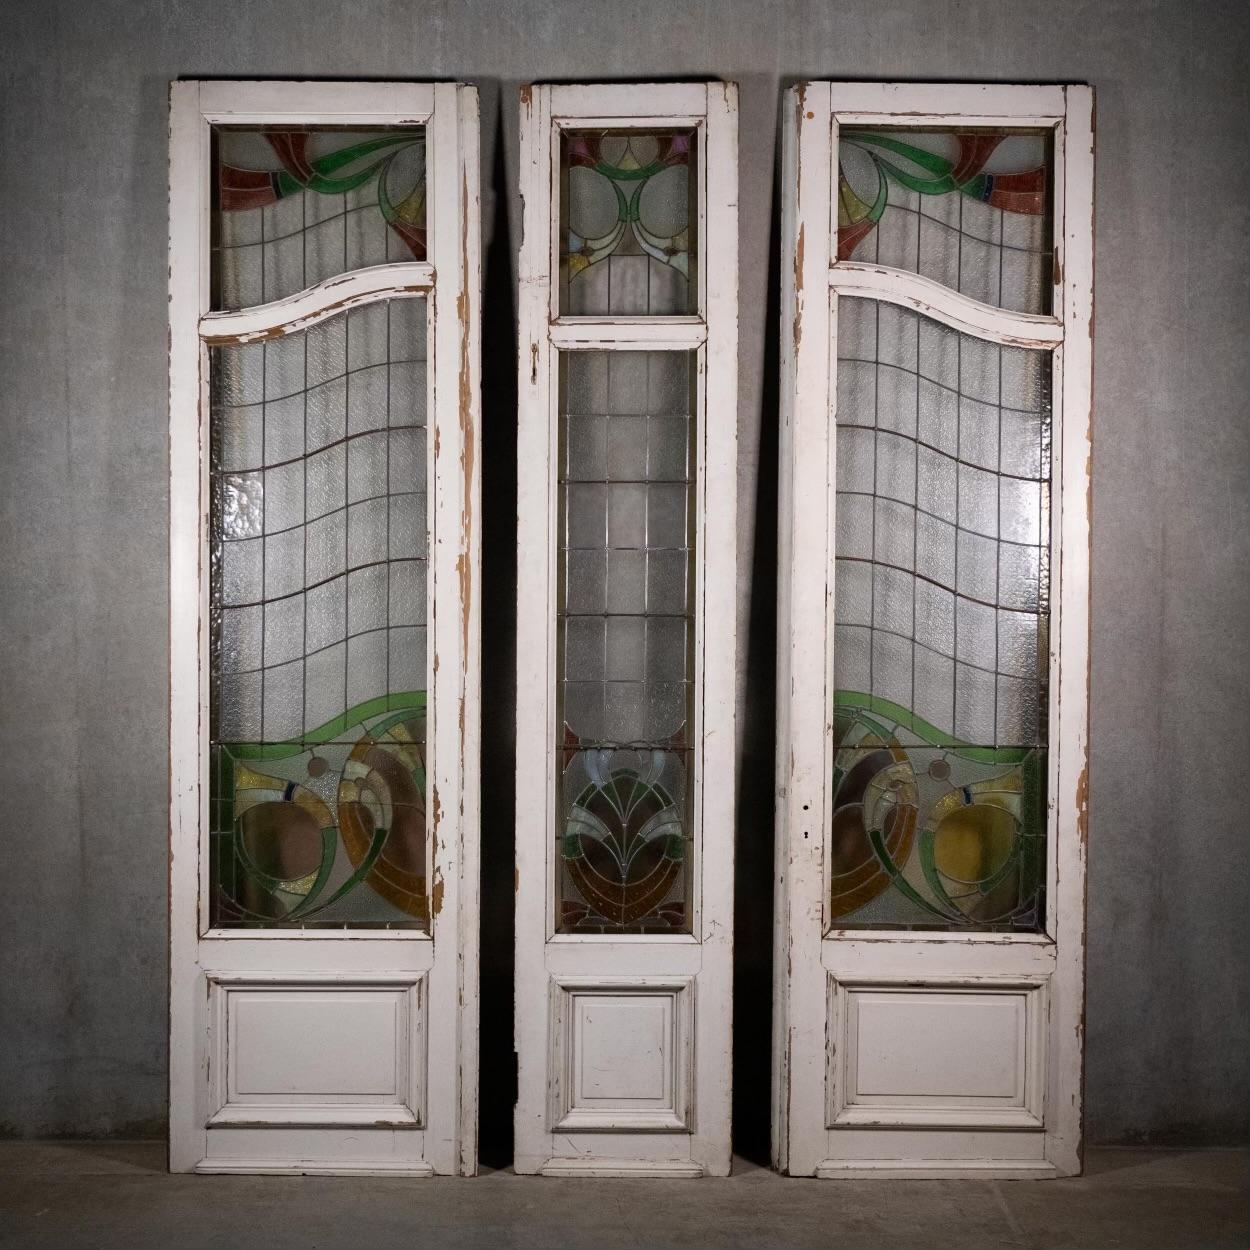 Exceptional set of large decorative stain glass vestibule doors from a large villa in southern France . Kept in storage in Canada for over 30 years .  Glass is in great condition with ability to use only two doors and a single panel .. many options